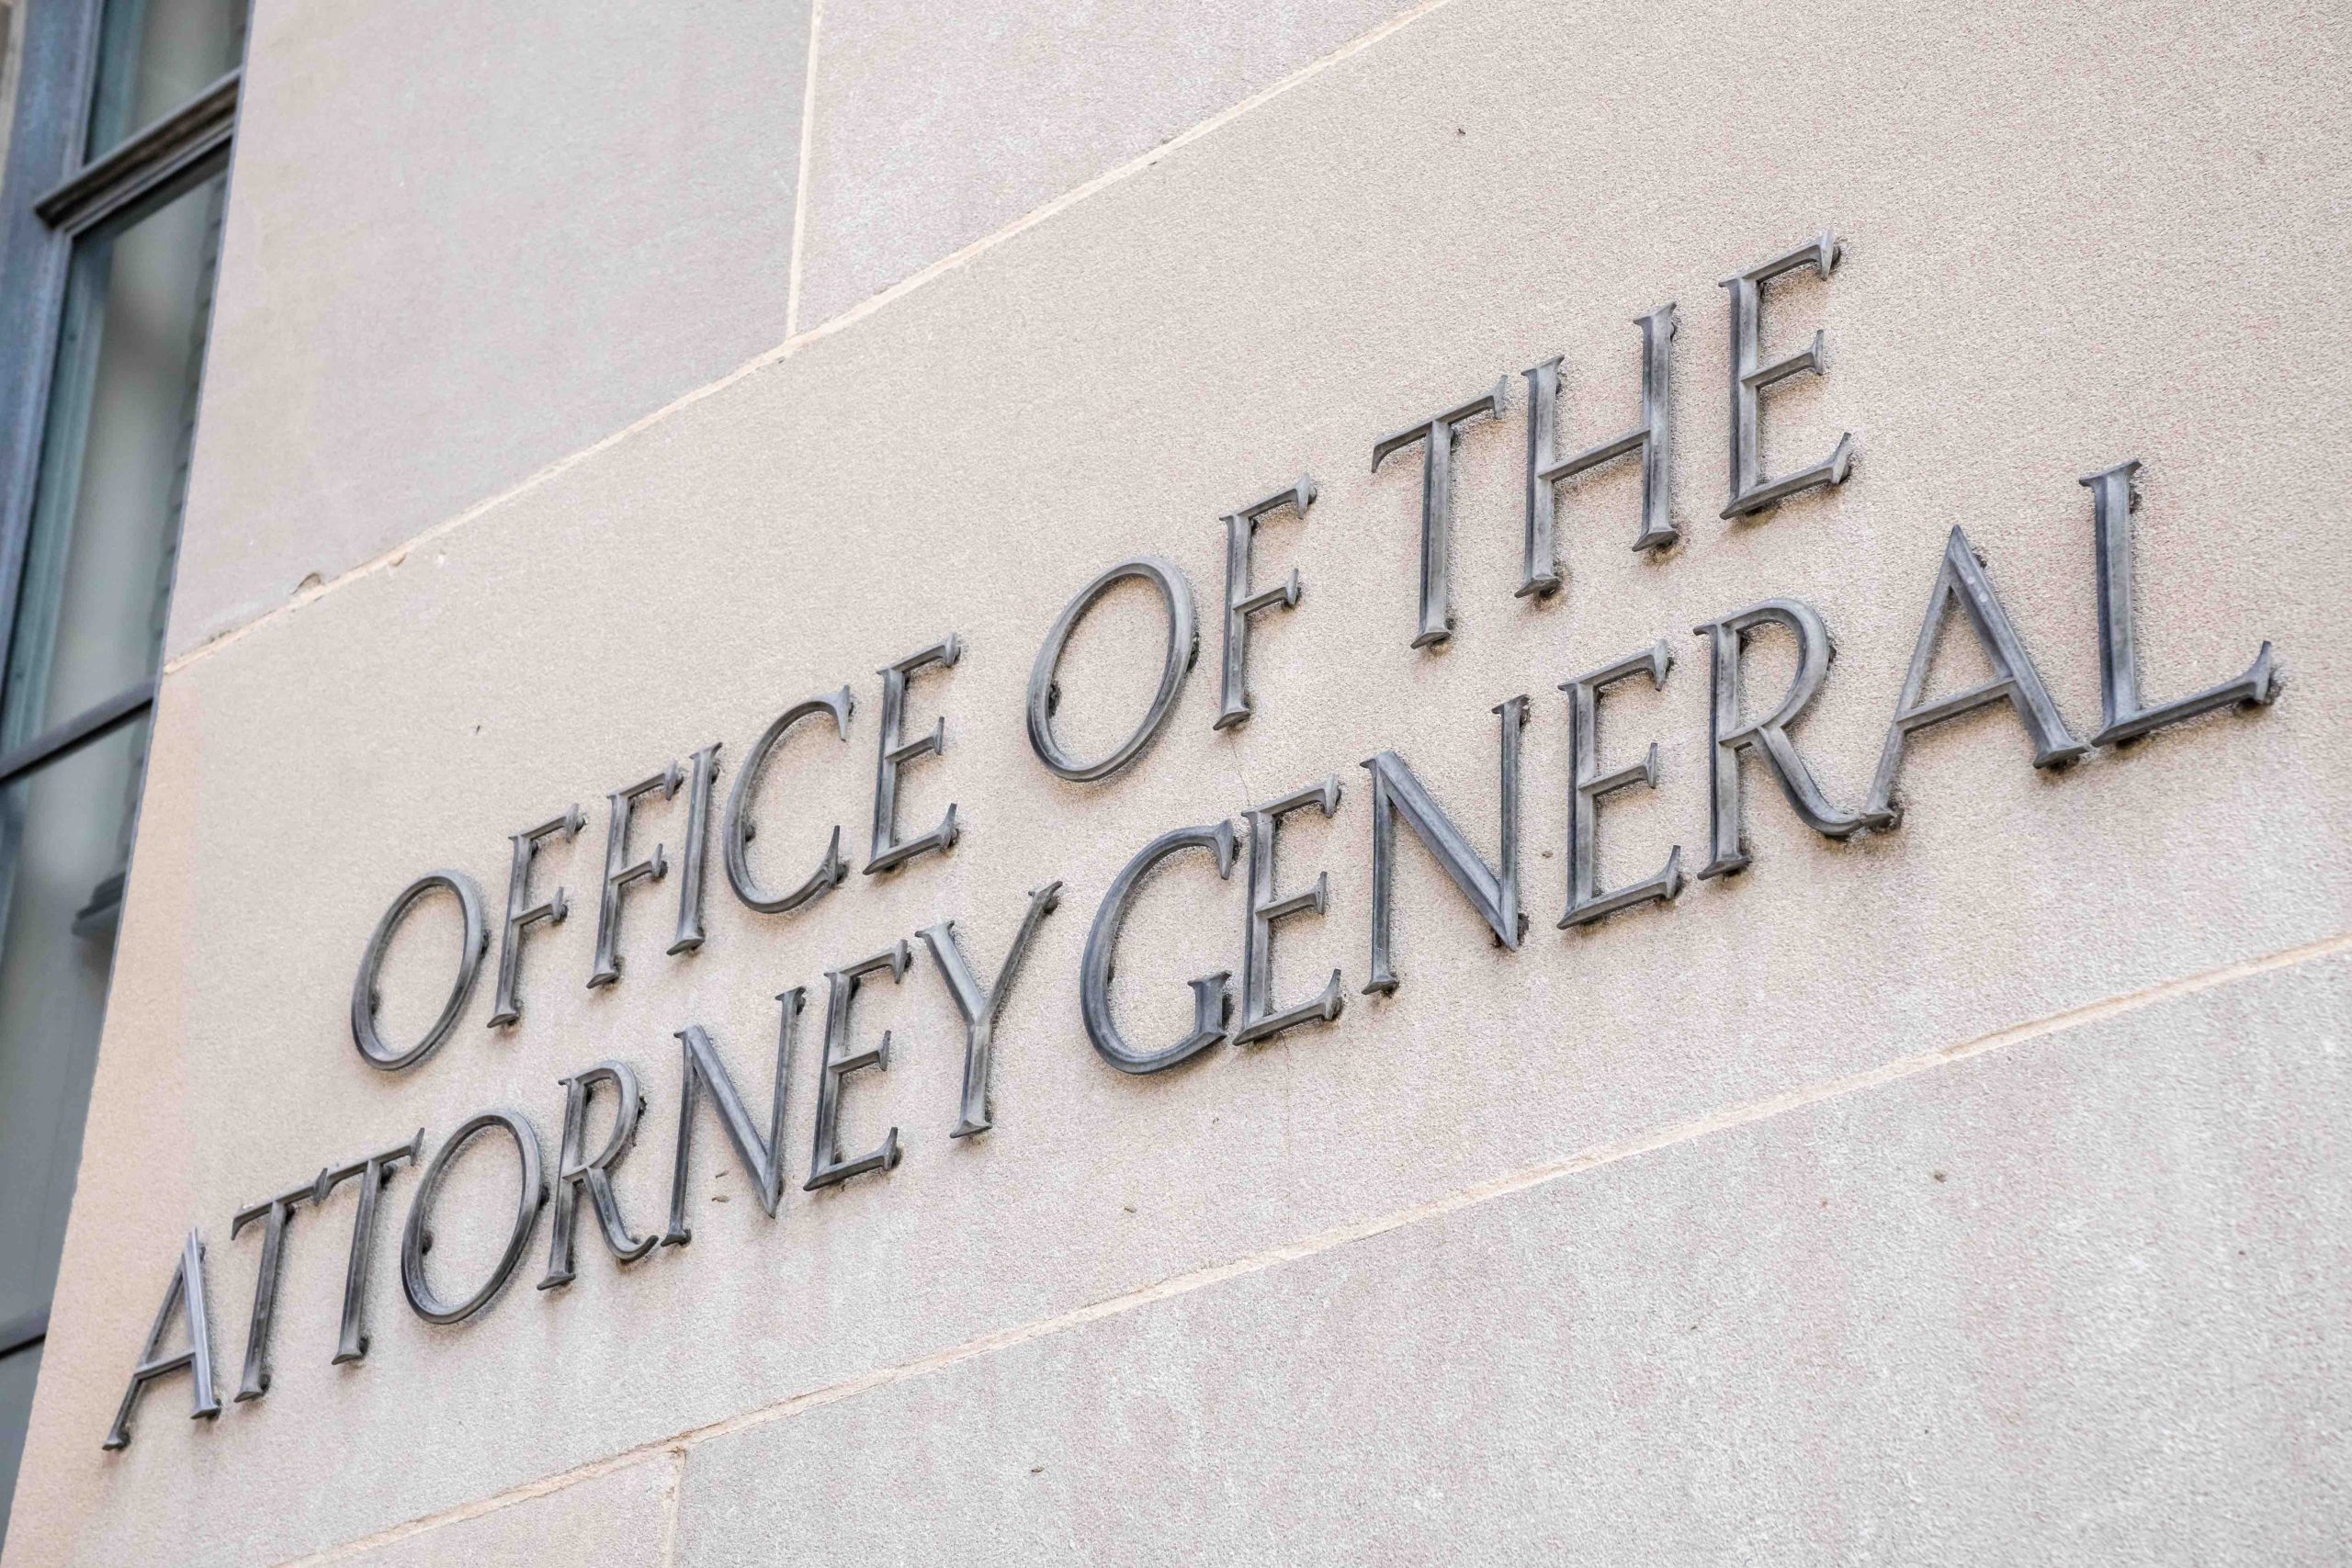 Sign on building reading "Office of the Attorney General"